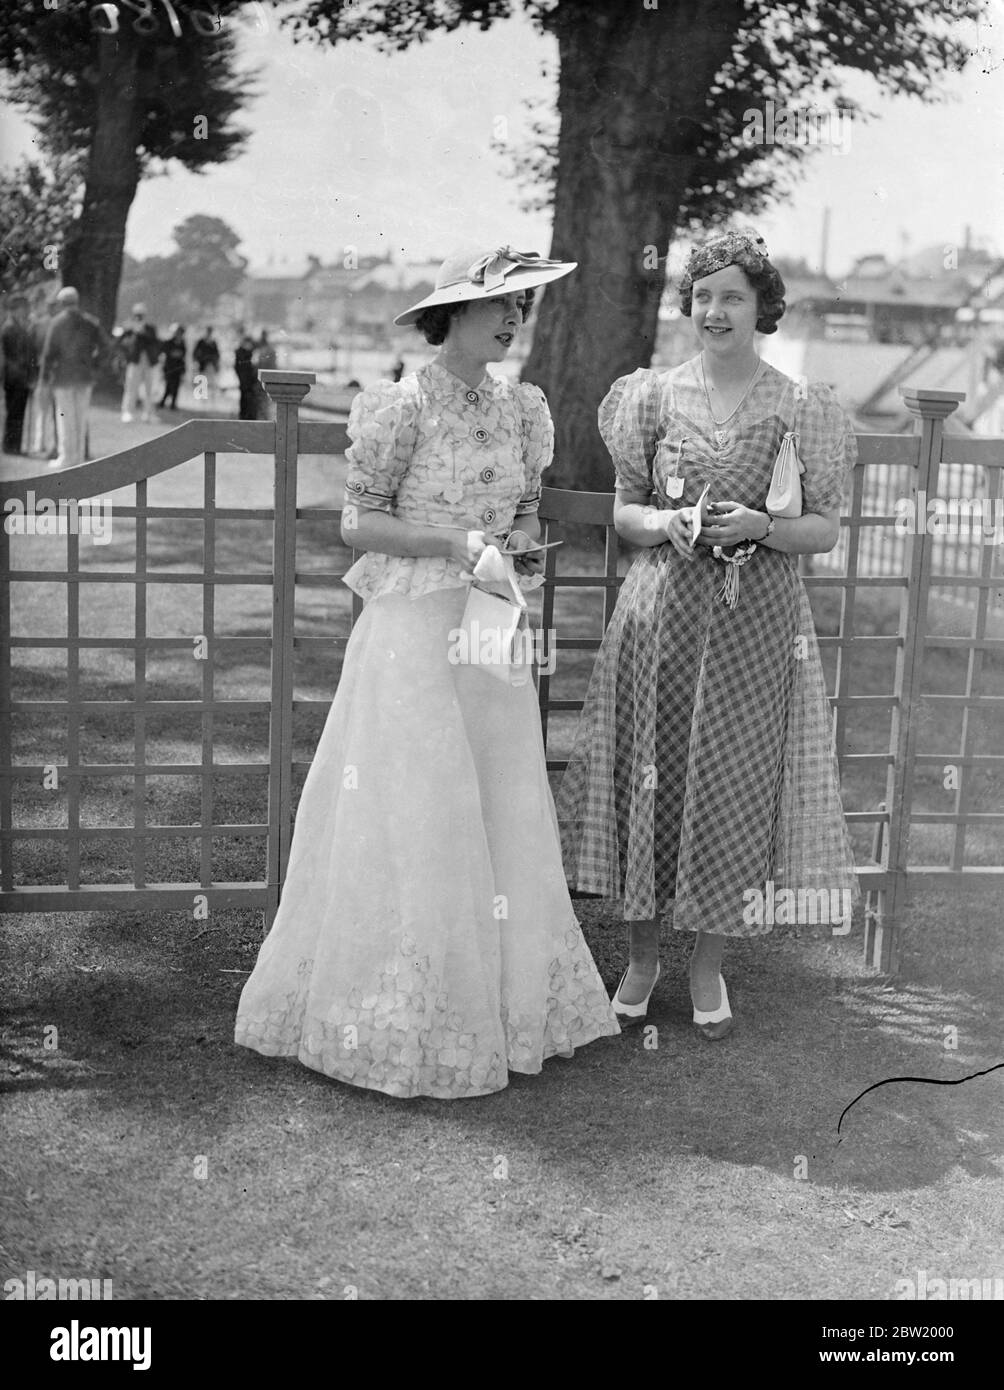 With the heatwave as encouragement, Henley's Royal Regatta vied with Ascot in variety of its fashions. The cool and elegant fashion worn by Miss Frances and Miss Iona McClean when the final day of Henley took place in the blazing July sunshine. 3 July 1937 Stock Photo